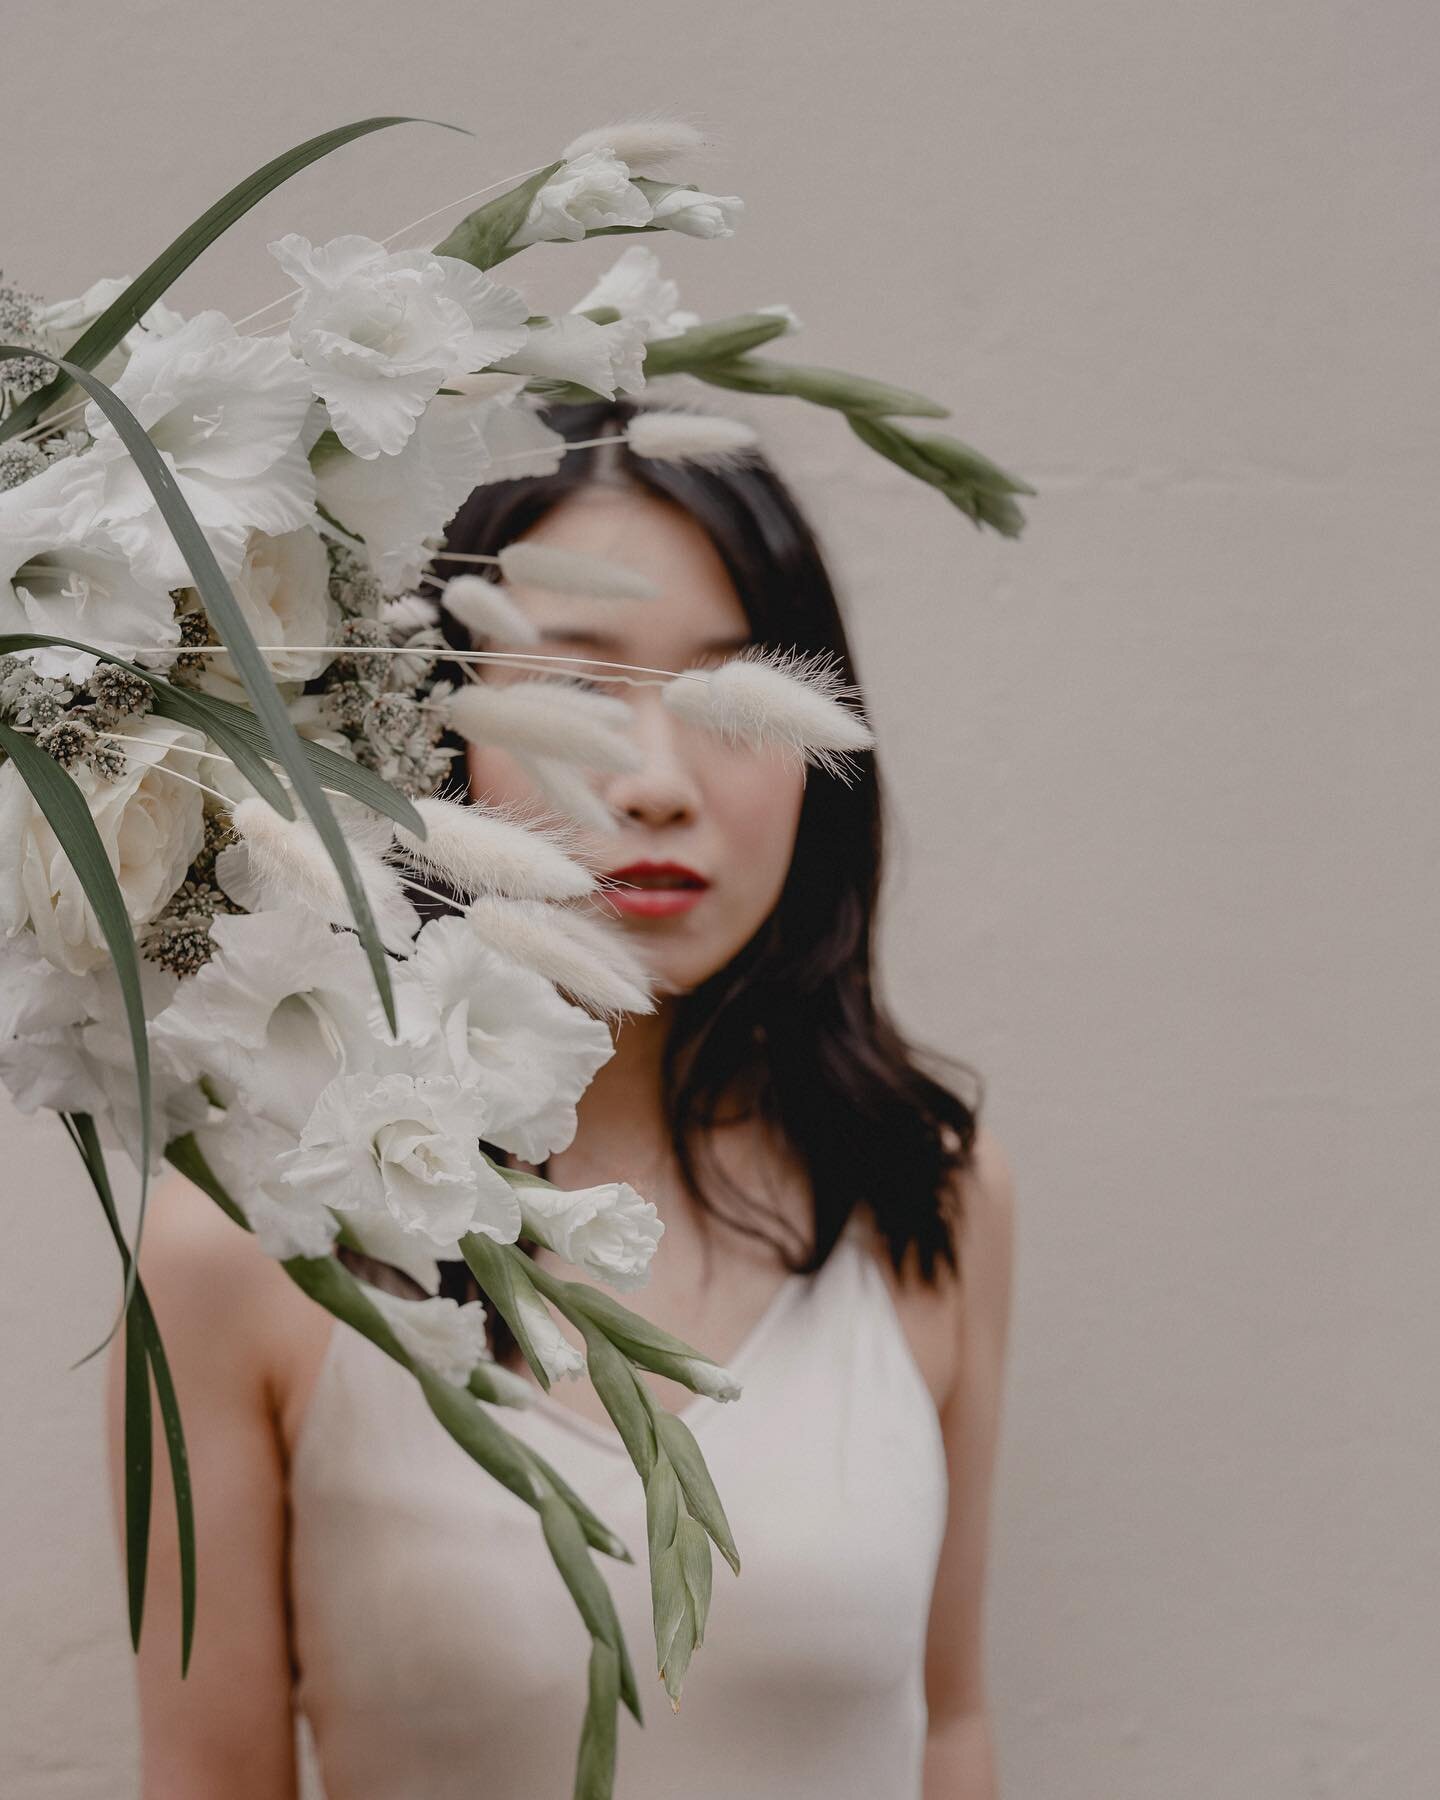 The very talented @hunchco took this with beautiful @lydia.this.is.amazing 

Neutral bouquet of glads, avalanches, reeds and bunny tails. 

#hunchco